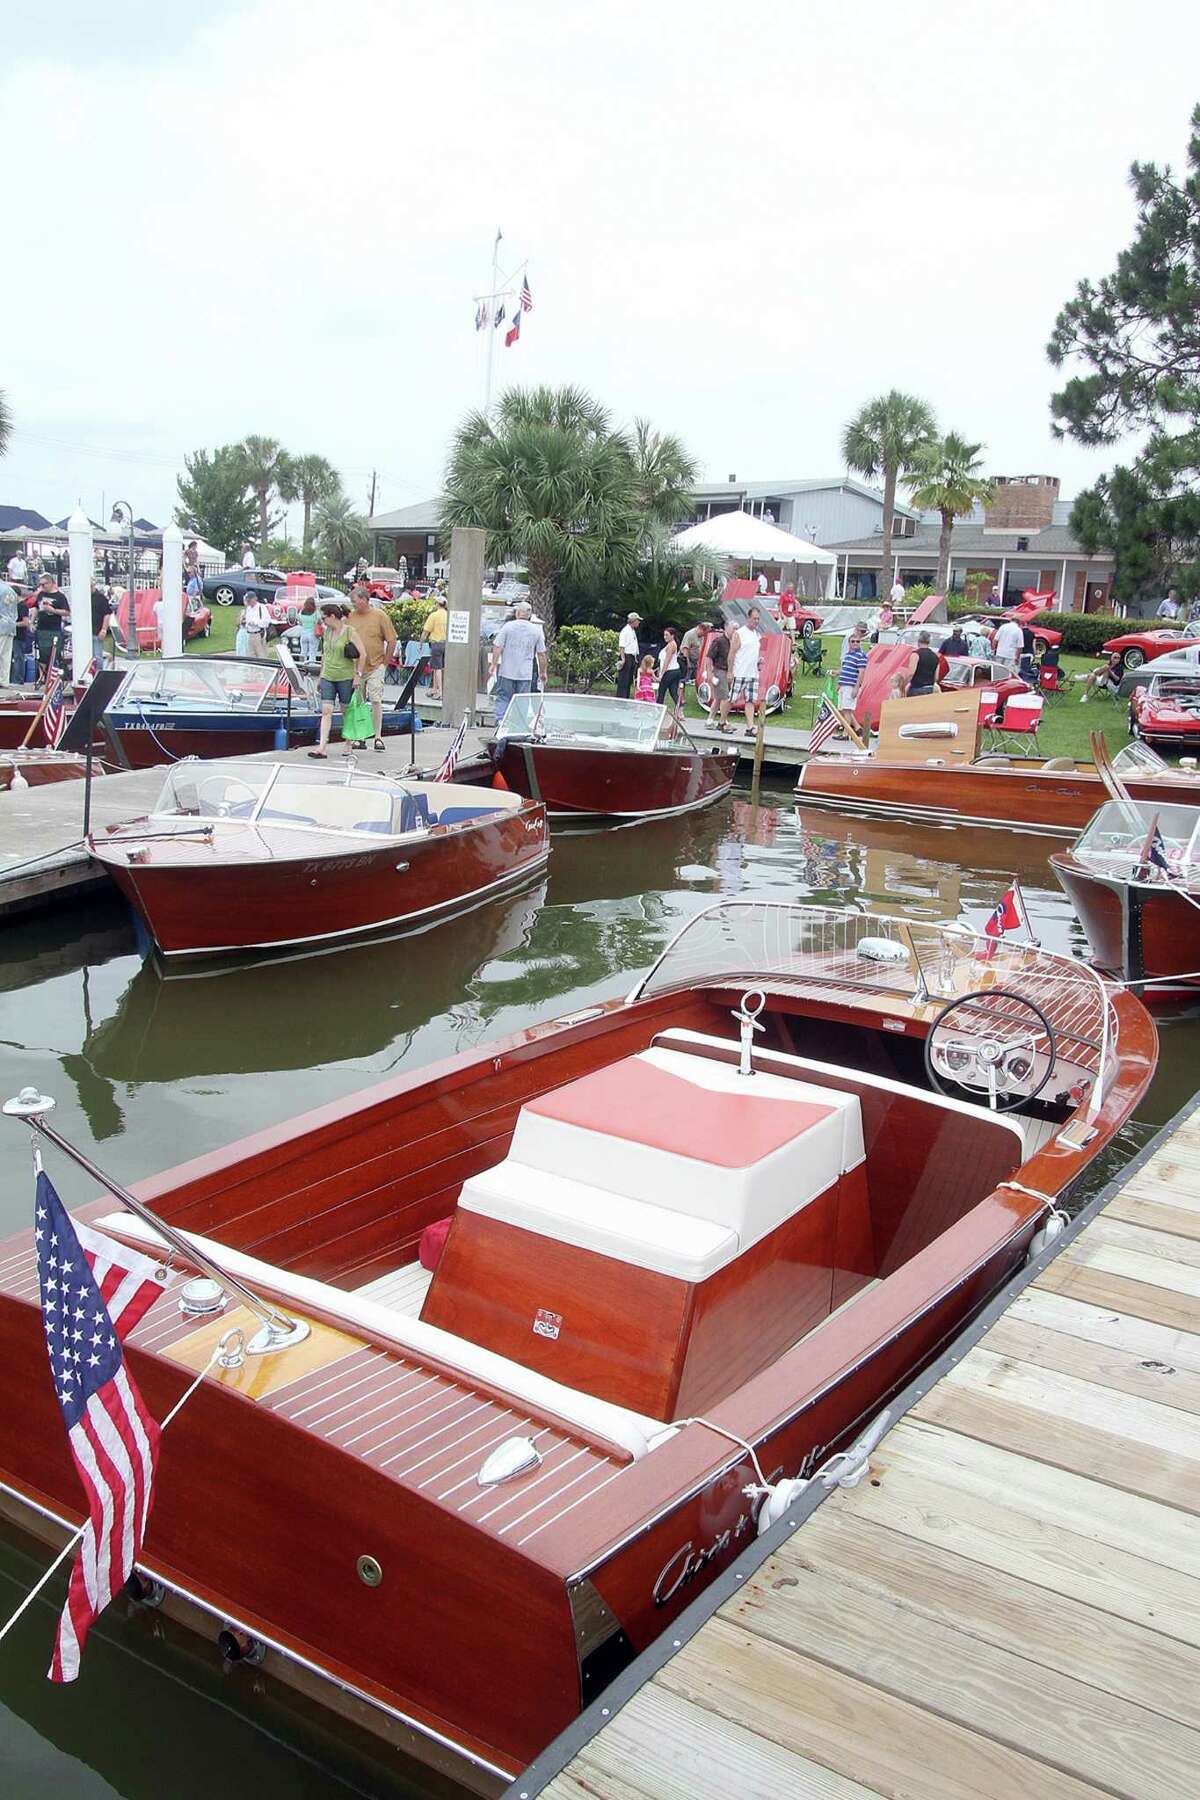 Hundreds of classes of cars and boats on display at the 17th Annual Keels & Wheels at Seabrook. Photo by Pin Lim.